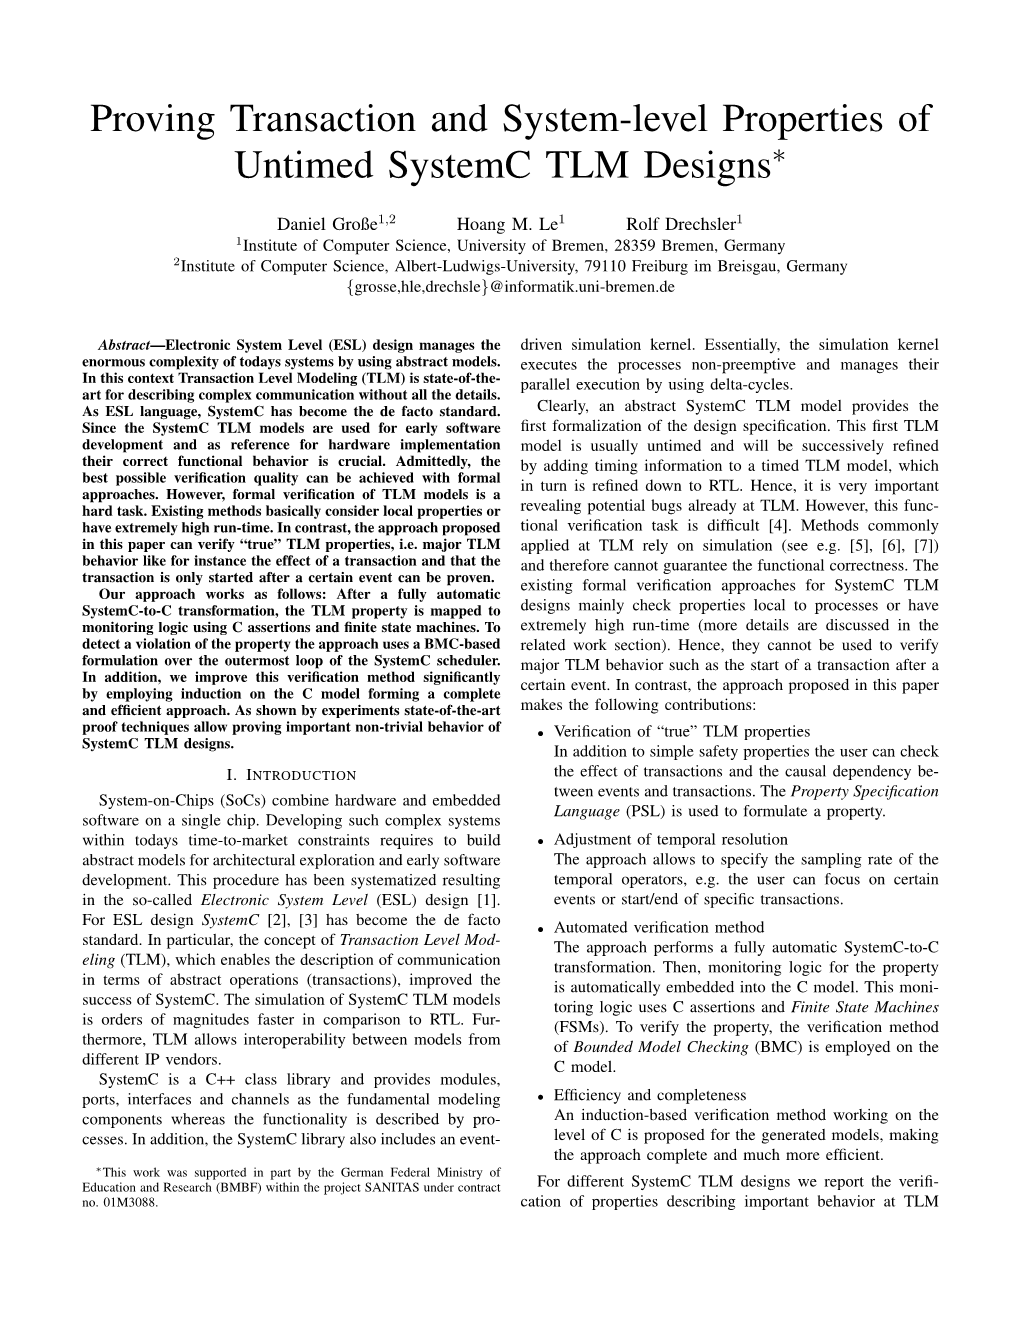 Proving Transaction and System-Level Properties of Untimed Systemc TLM Designs∗